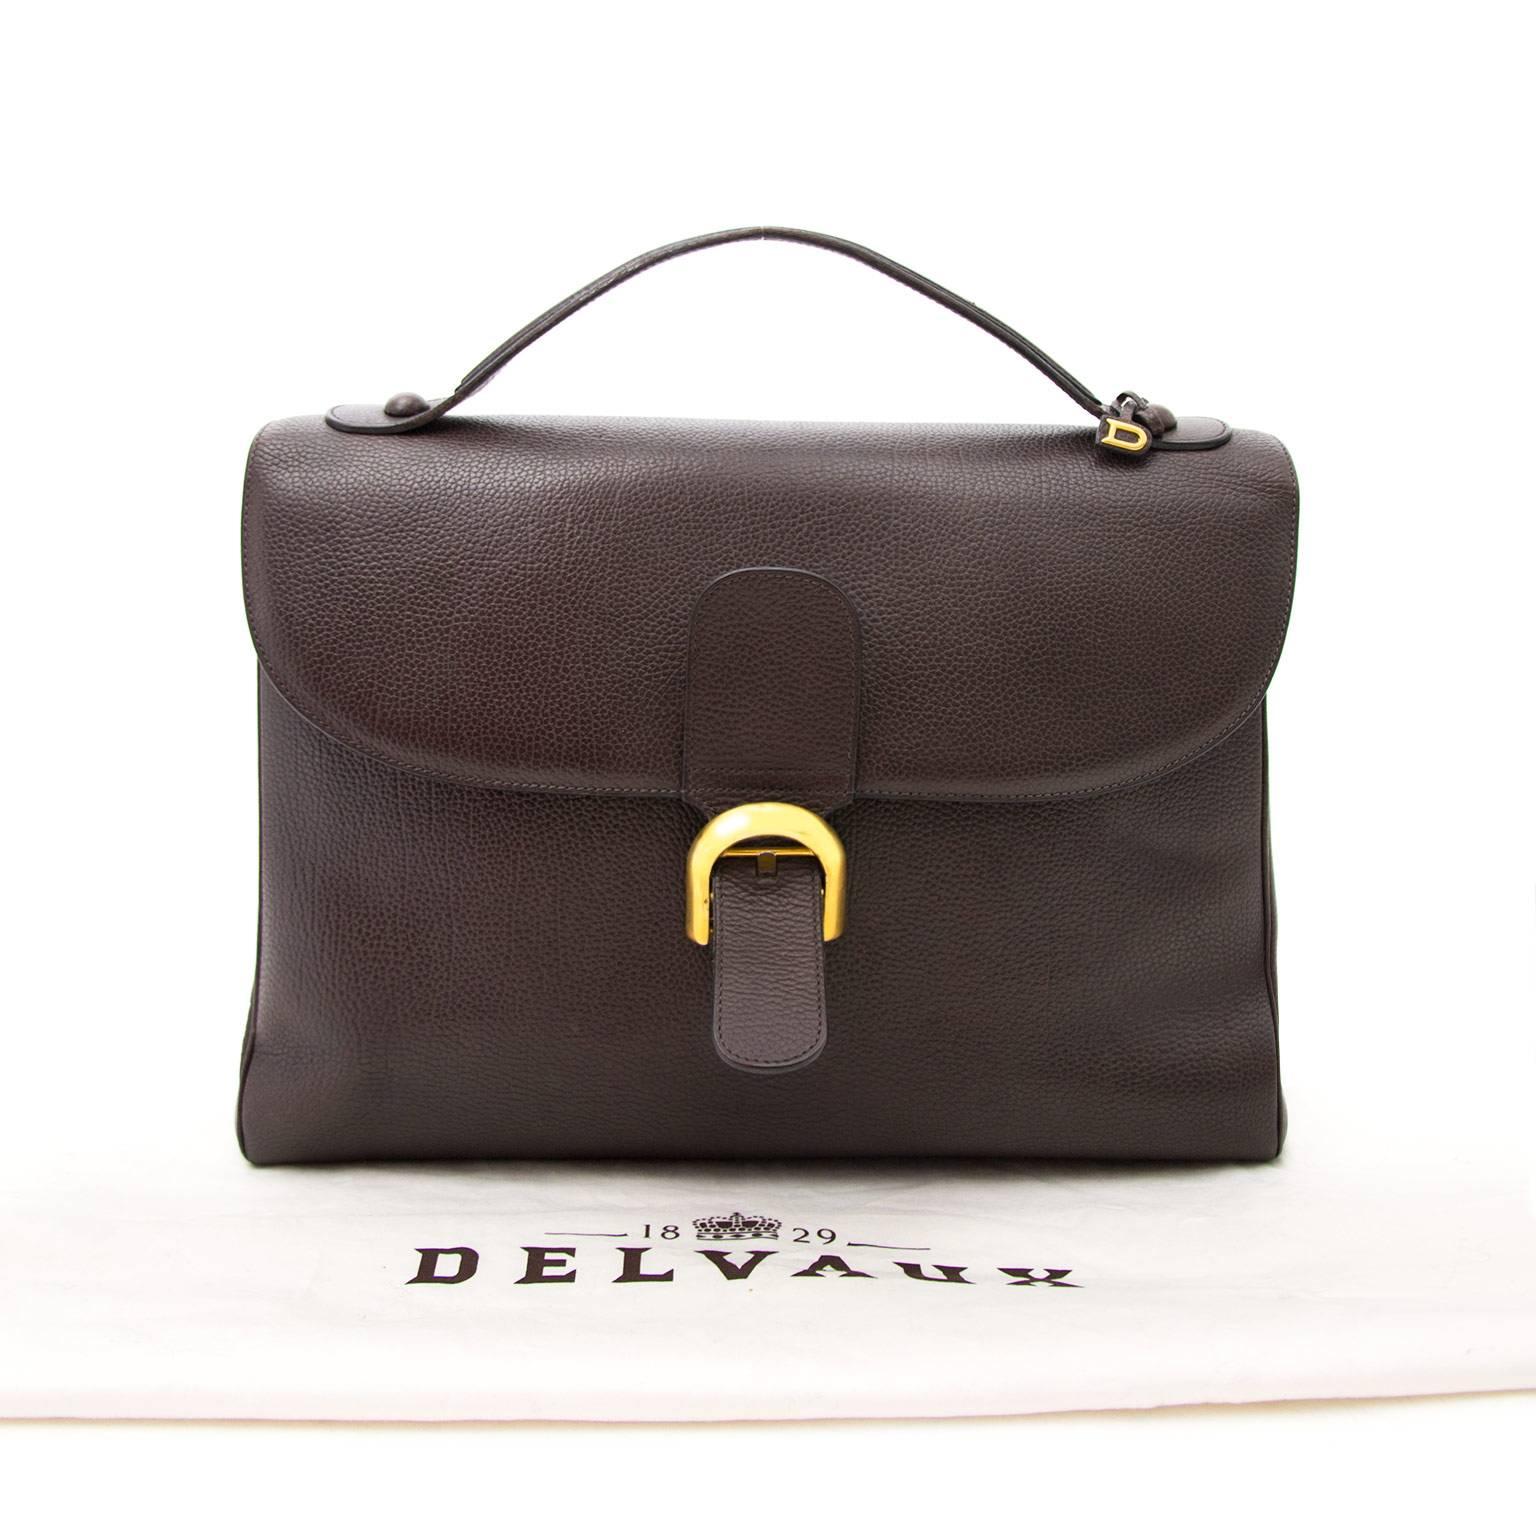 Very Good Preloved Condition

Estimated retail price €2500,00

Delvaux Dark Brown Brillant Briefcase

A timeless piece by the Belgian house Delvaux, this dark brown briefcase will make sure you enter the office in style.
Featuring the iconic